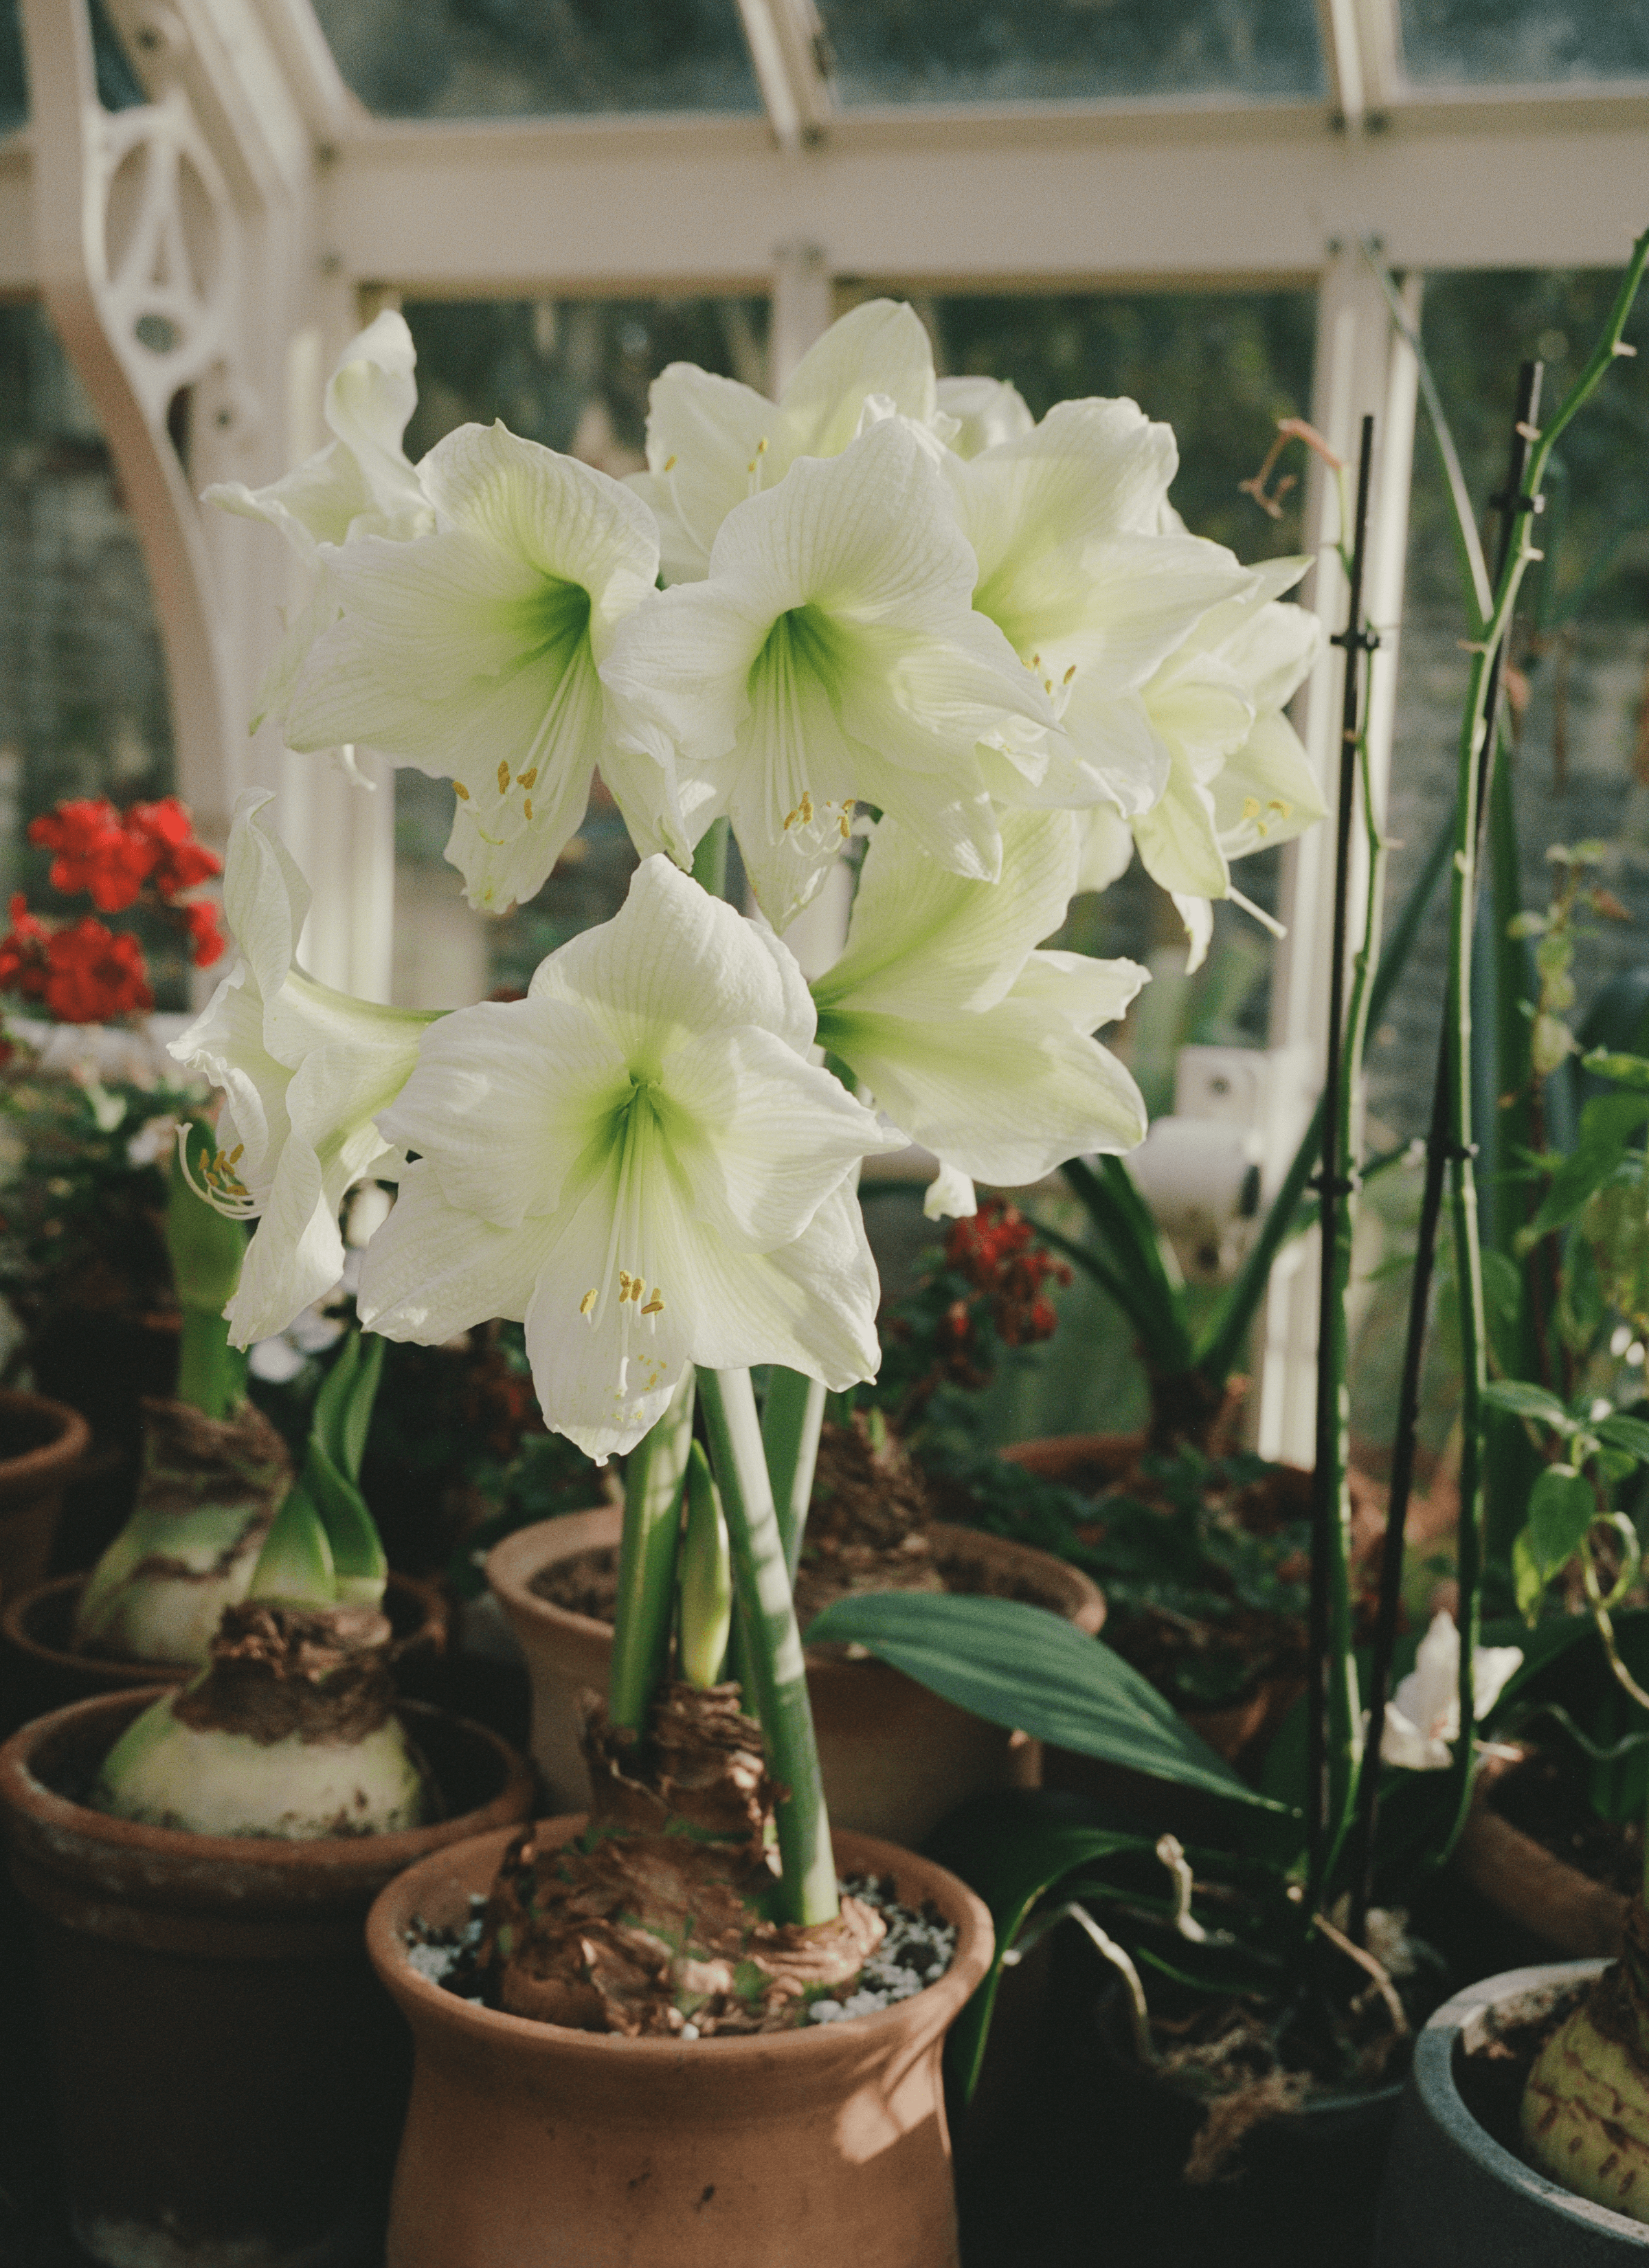 A pot of white Amaryllis grows in a terracotta pot.